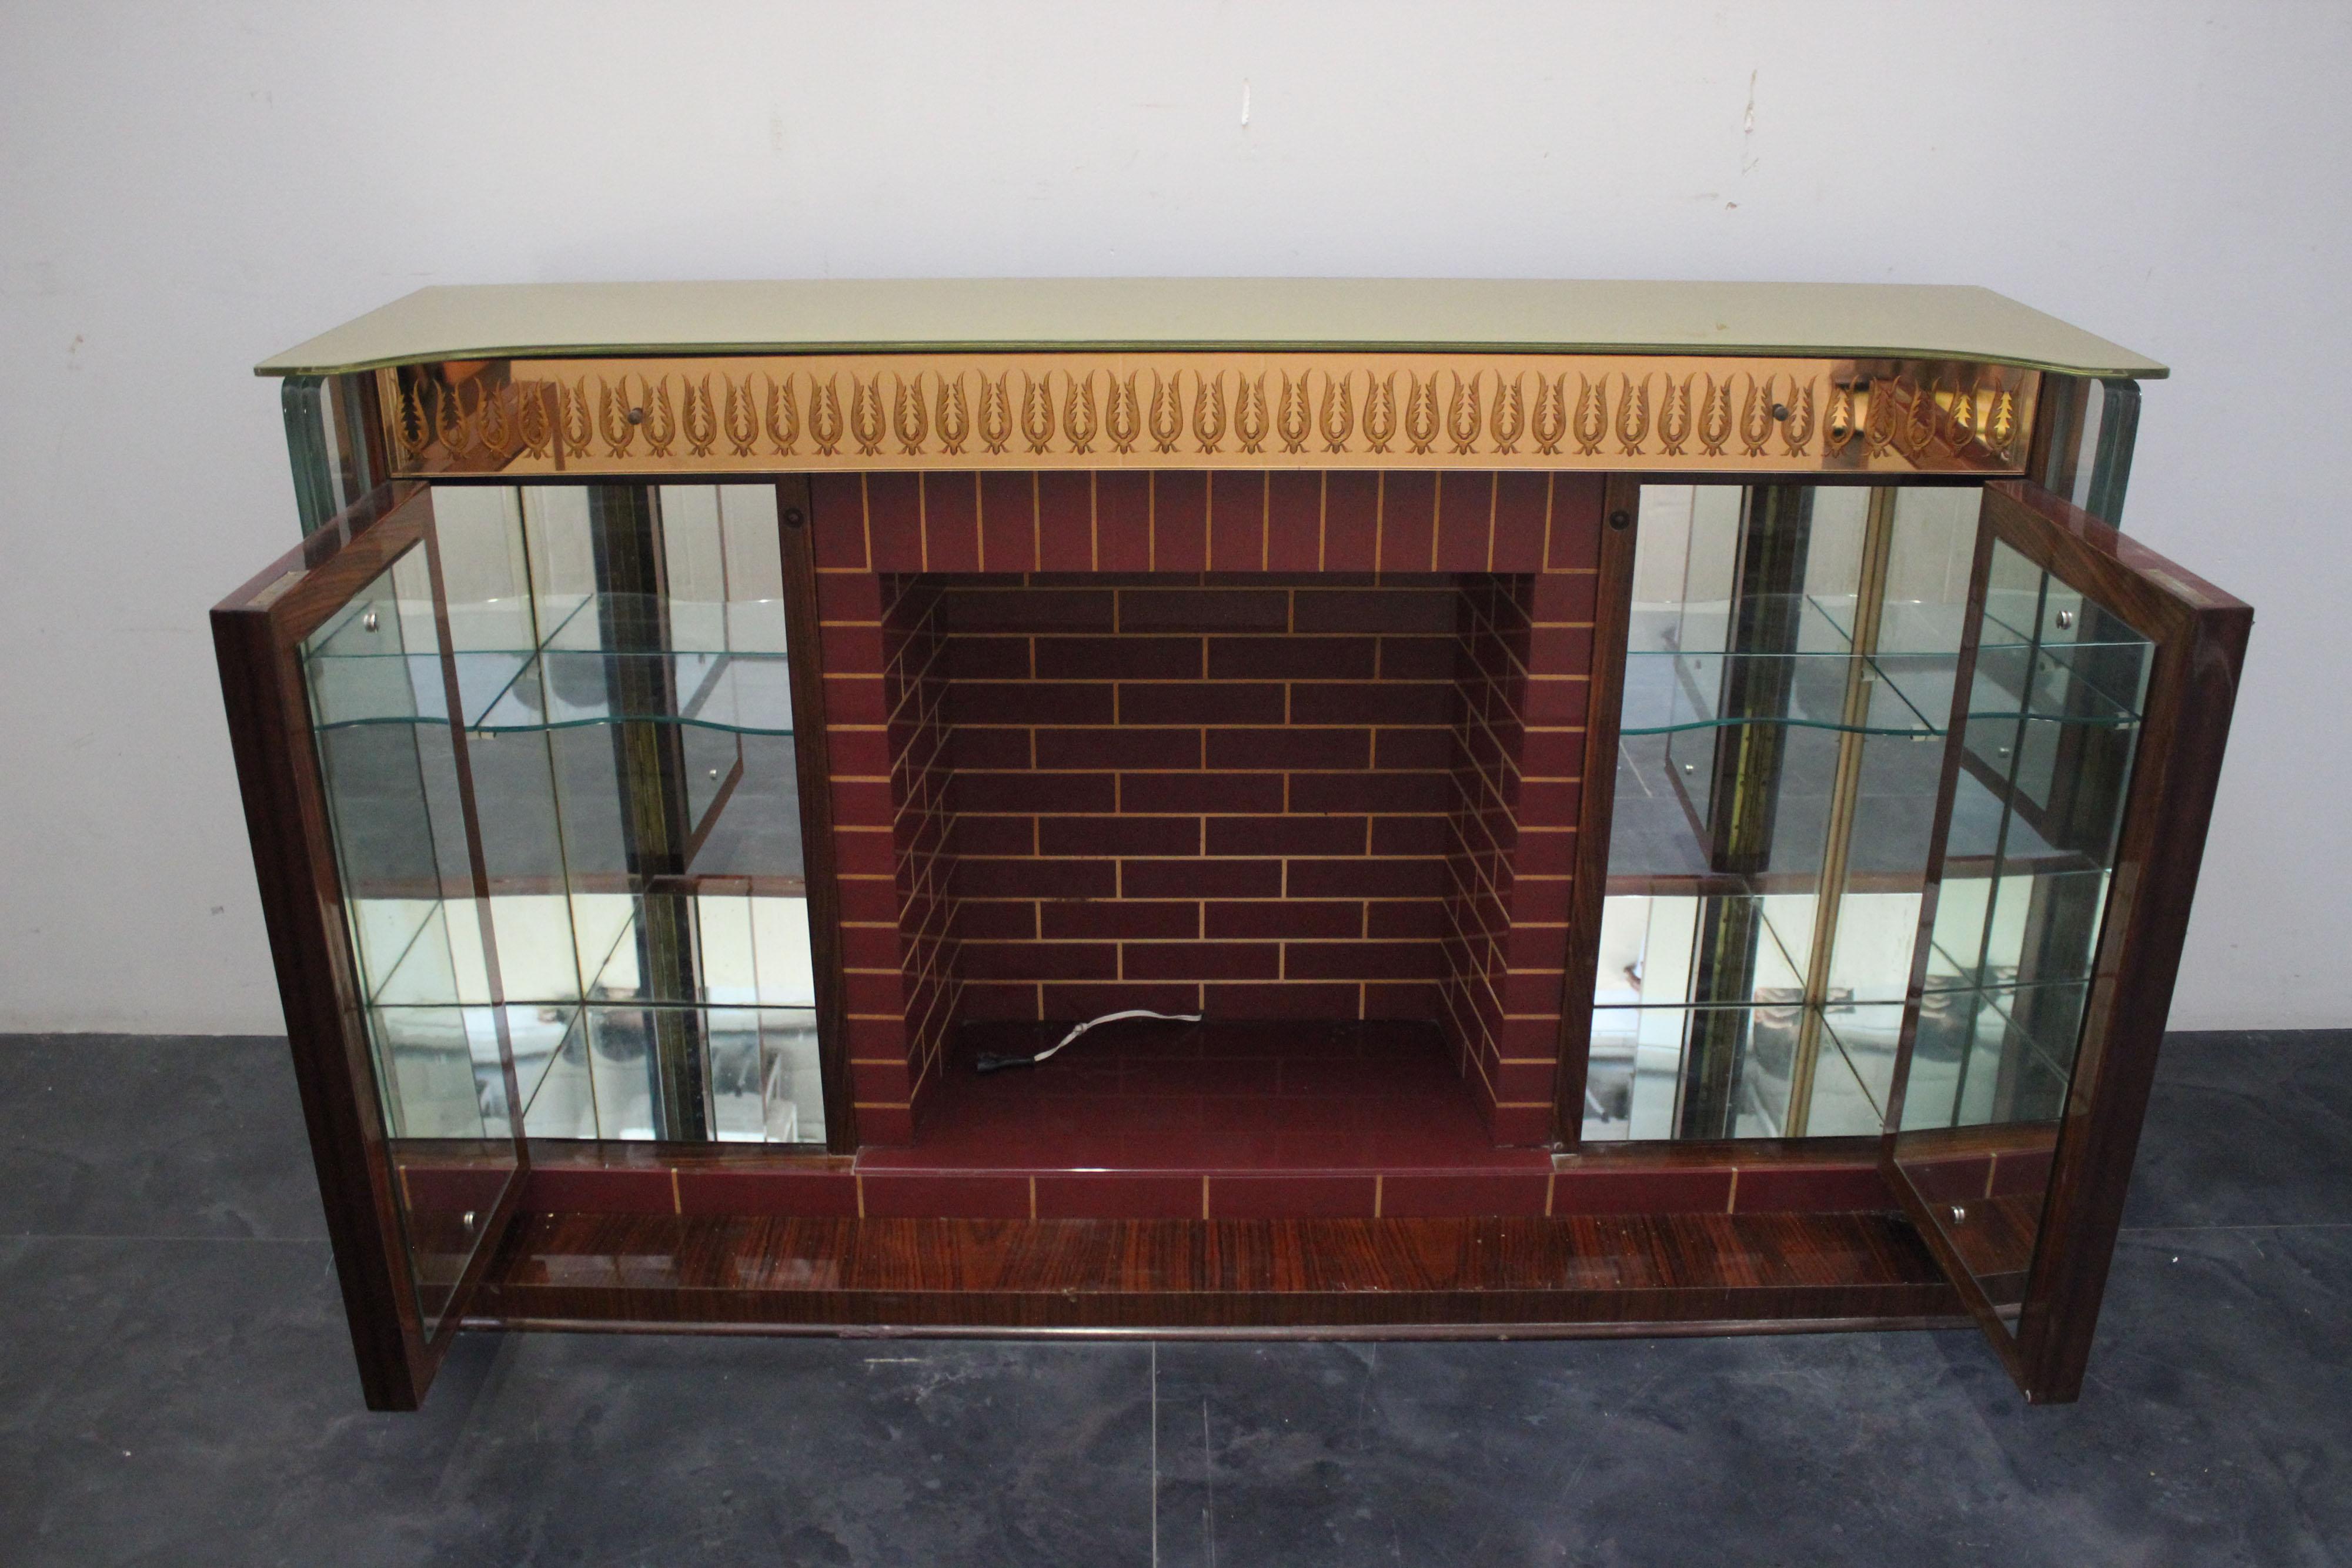 Singular bar cabinet in the form of a fireplace. Rosewood sides and base. On the front it has burgundy glass rectangles profiled in maple imitating masonry, doors and under-top band with mirrors engraved with classical motifs with gold appliqué.